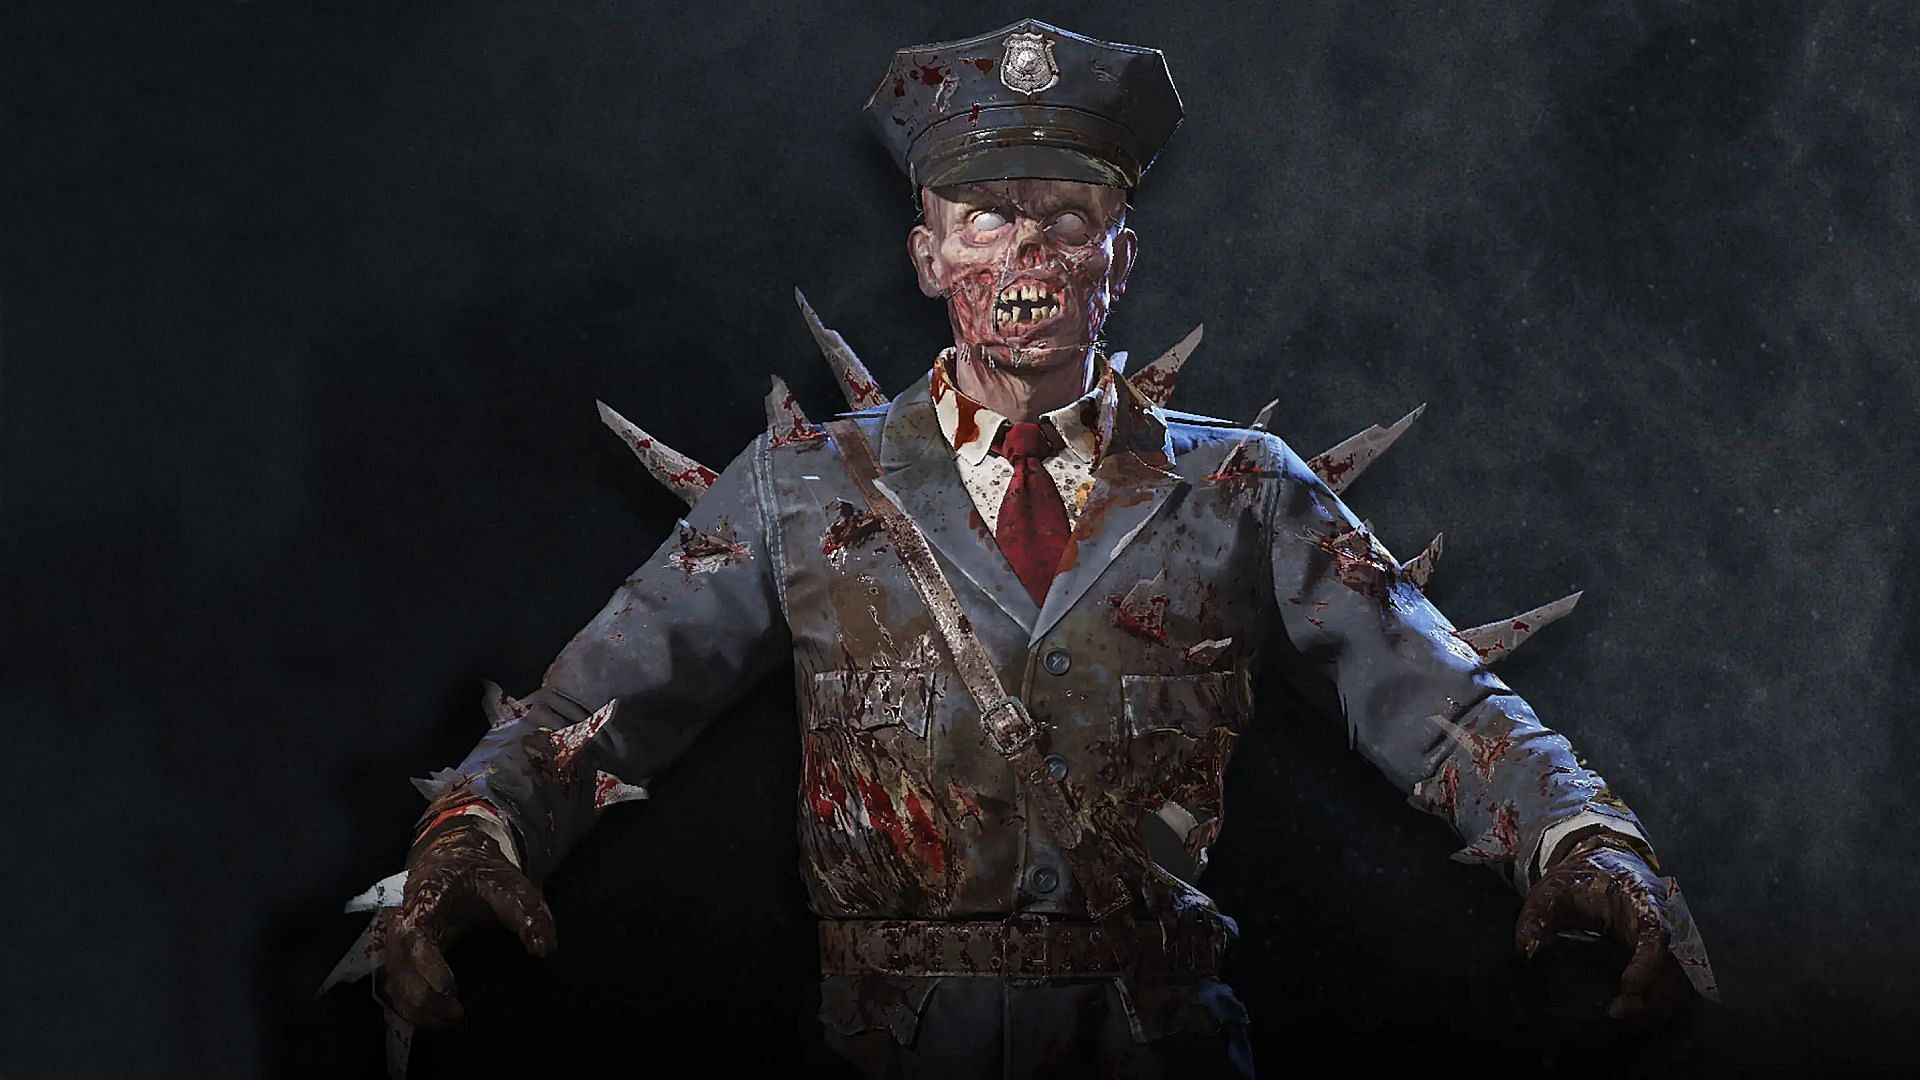 COD: Mobile Prime Gaming Offer: Get Free Zombie Operator Skin Now